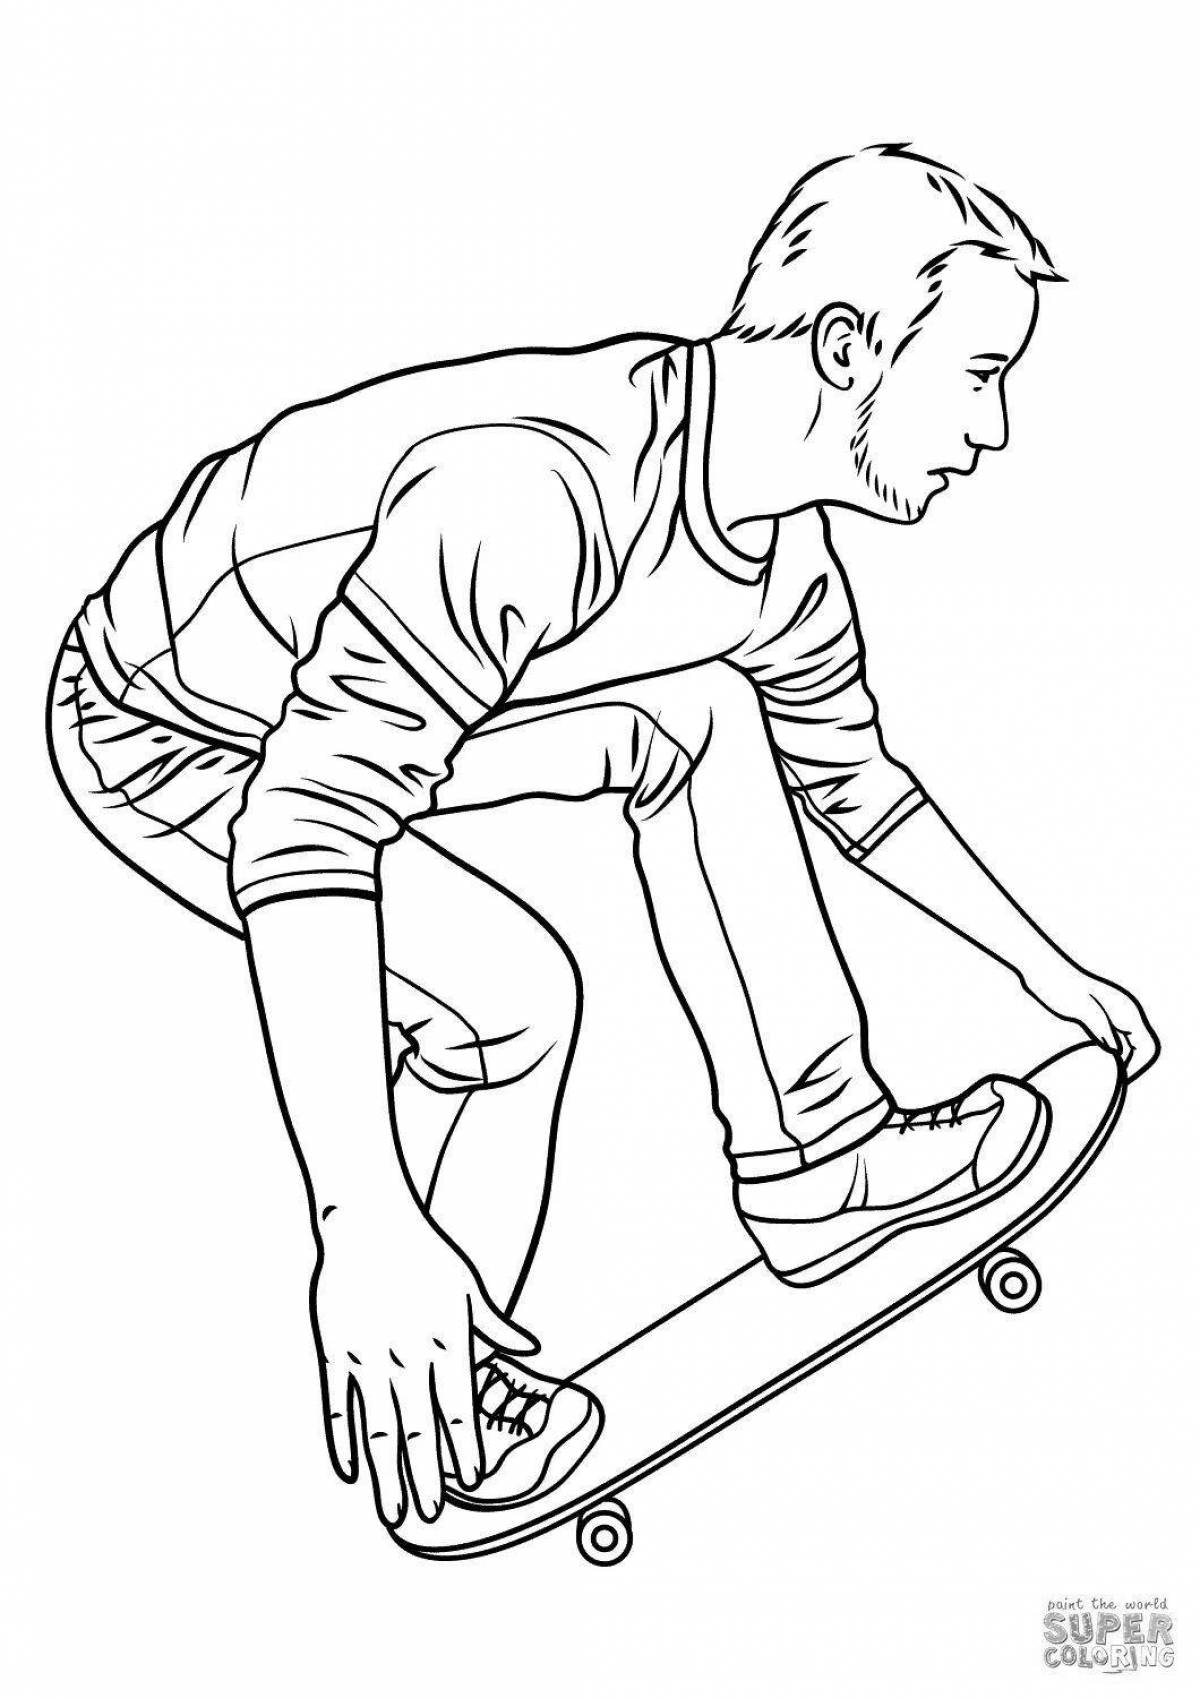 Coloring page joyful stunt scooter